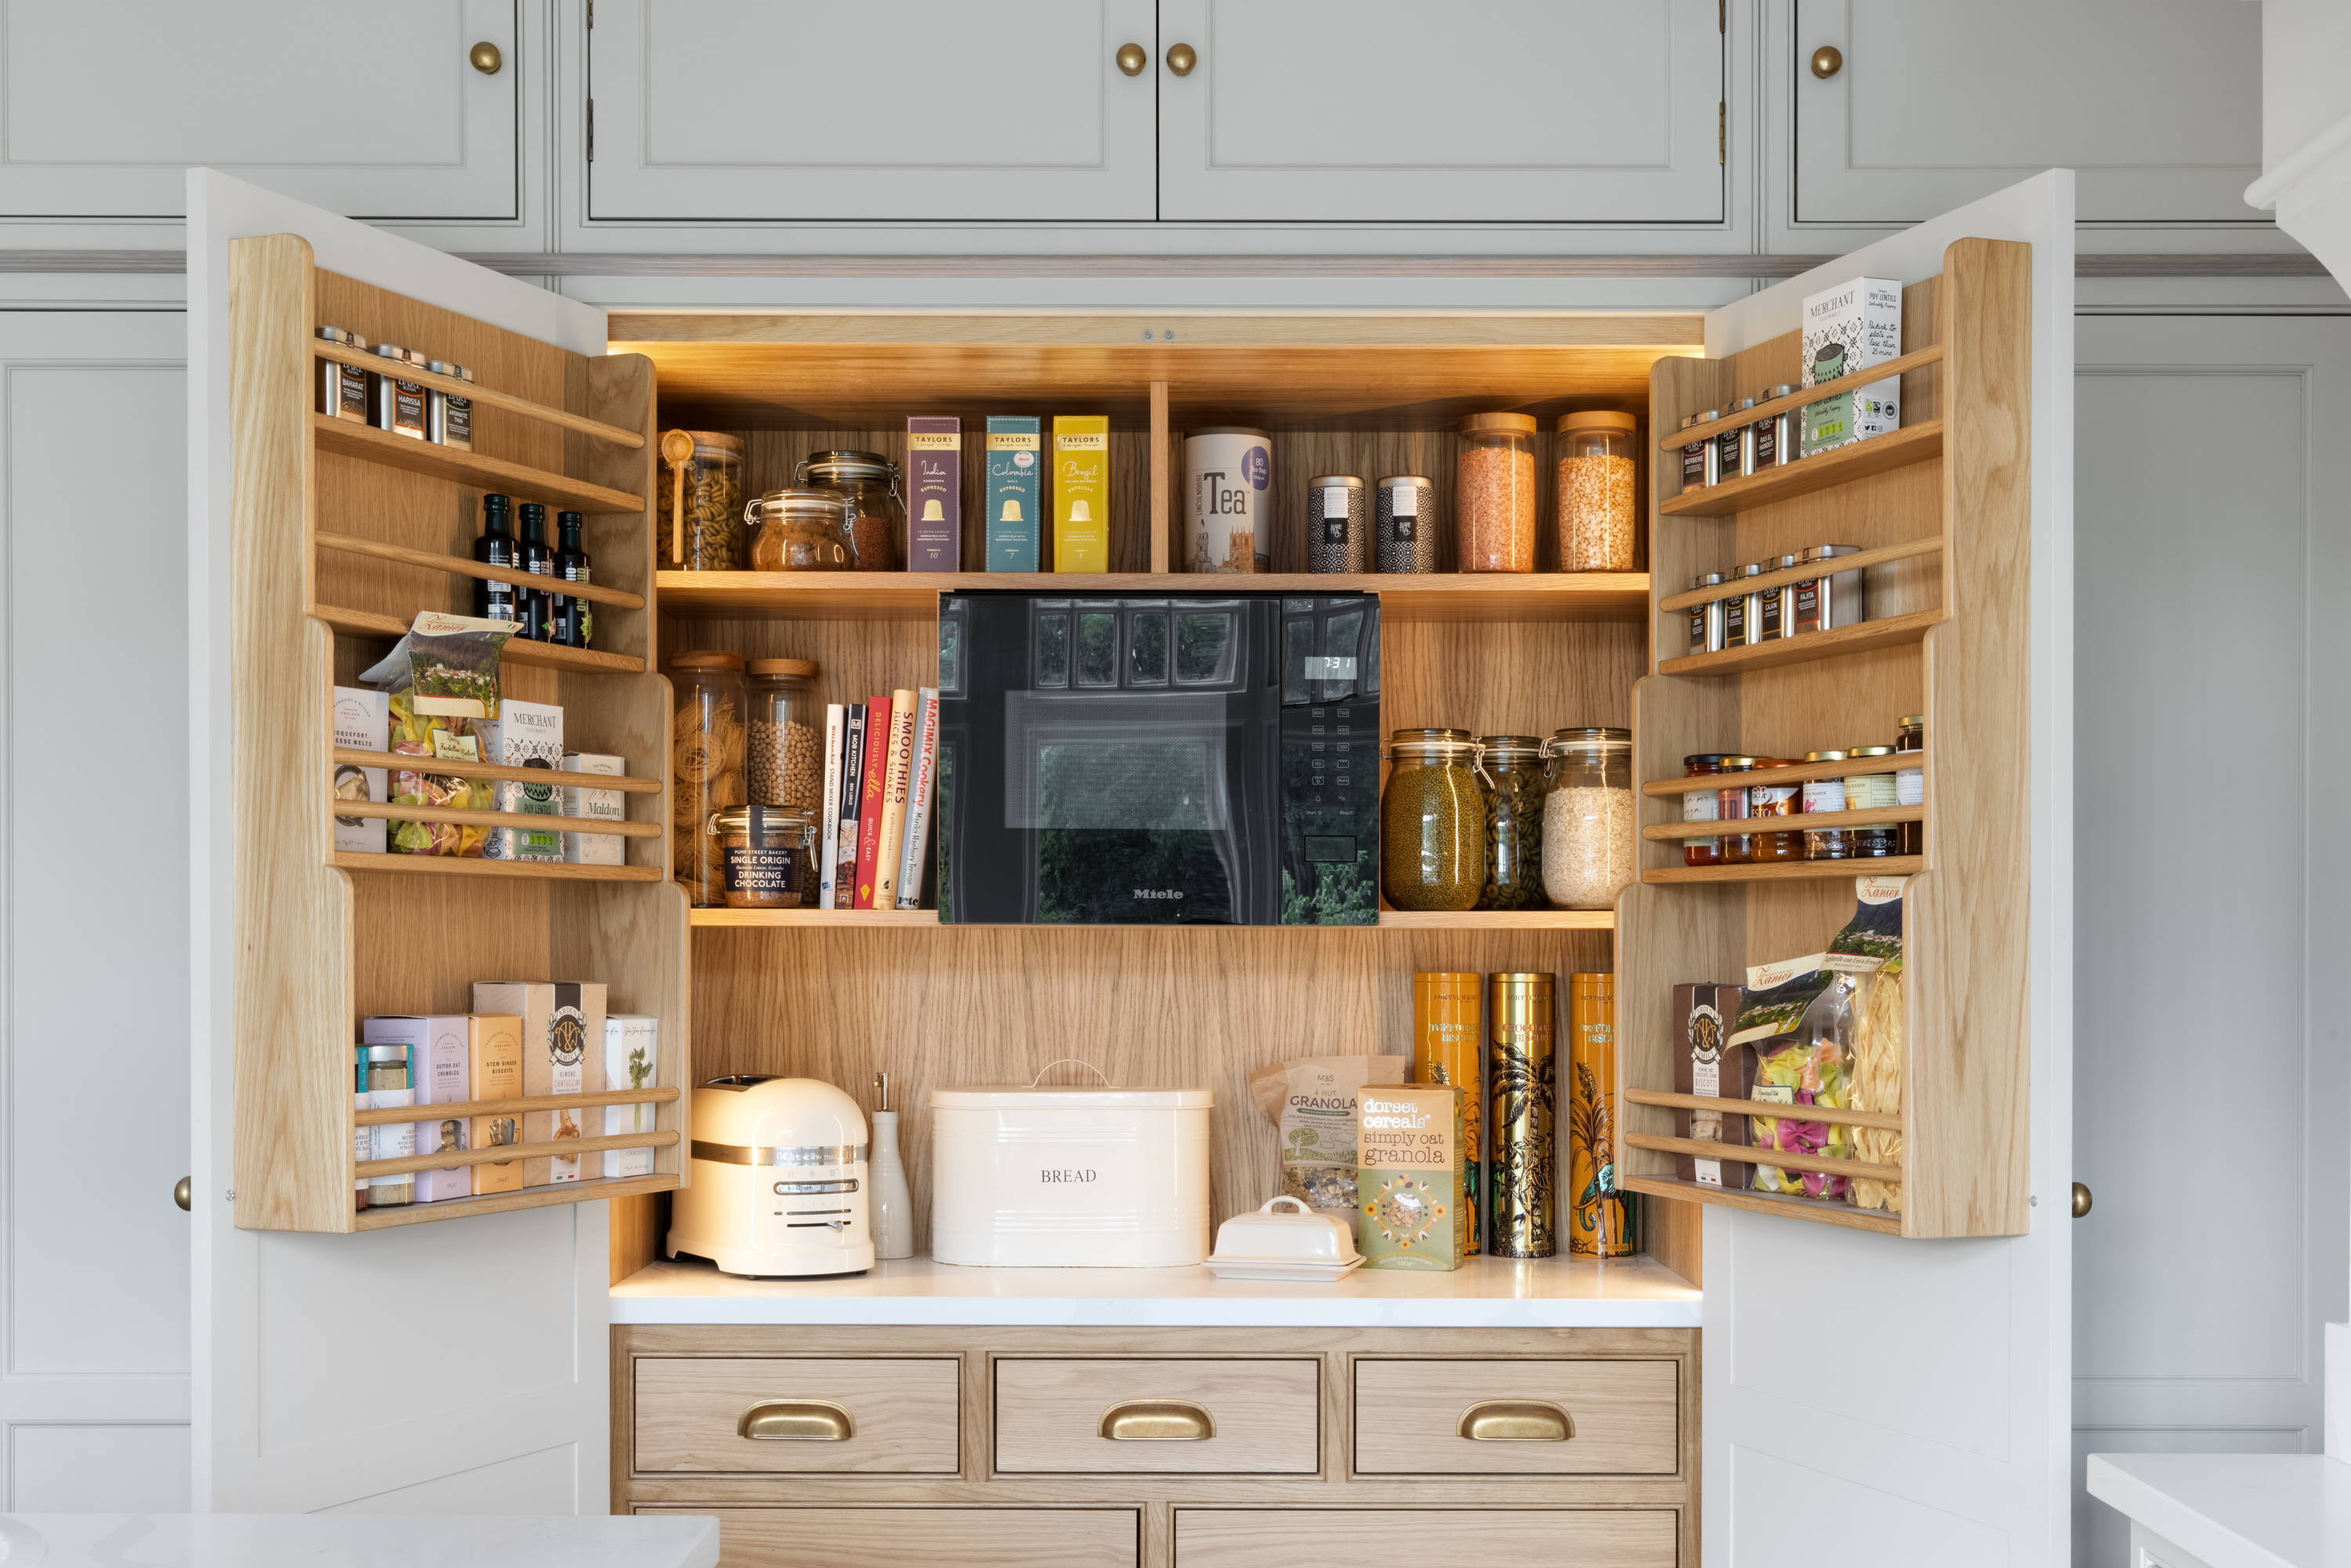 Pantry Cabinets - 7 Ways to Create Pantry and Kitchen Storage  Kitchen  wall storage cabinets, Pantry design, Kitchen pantry design